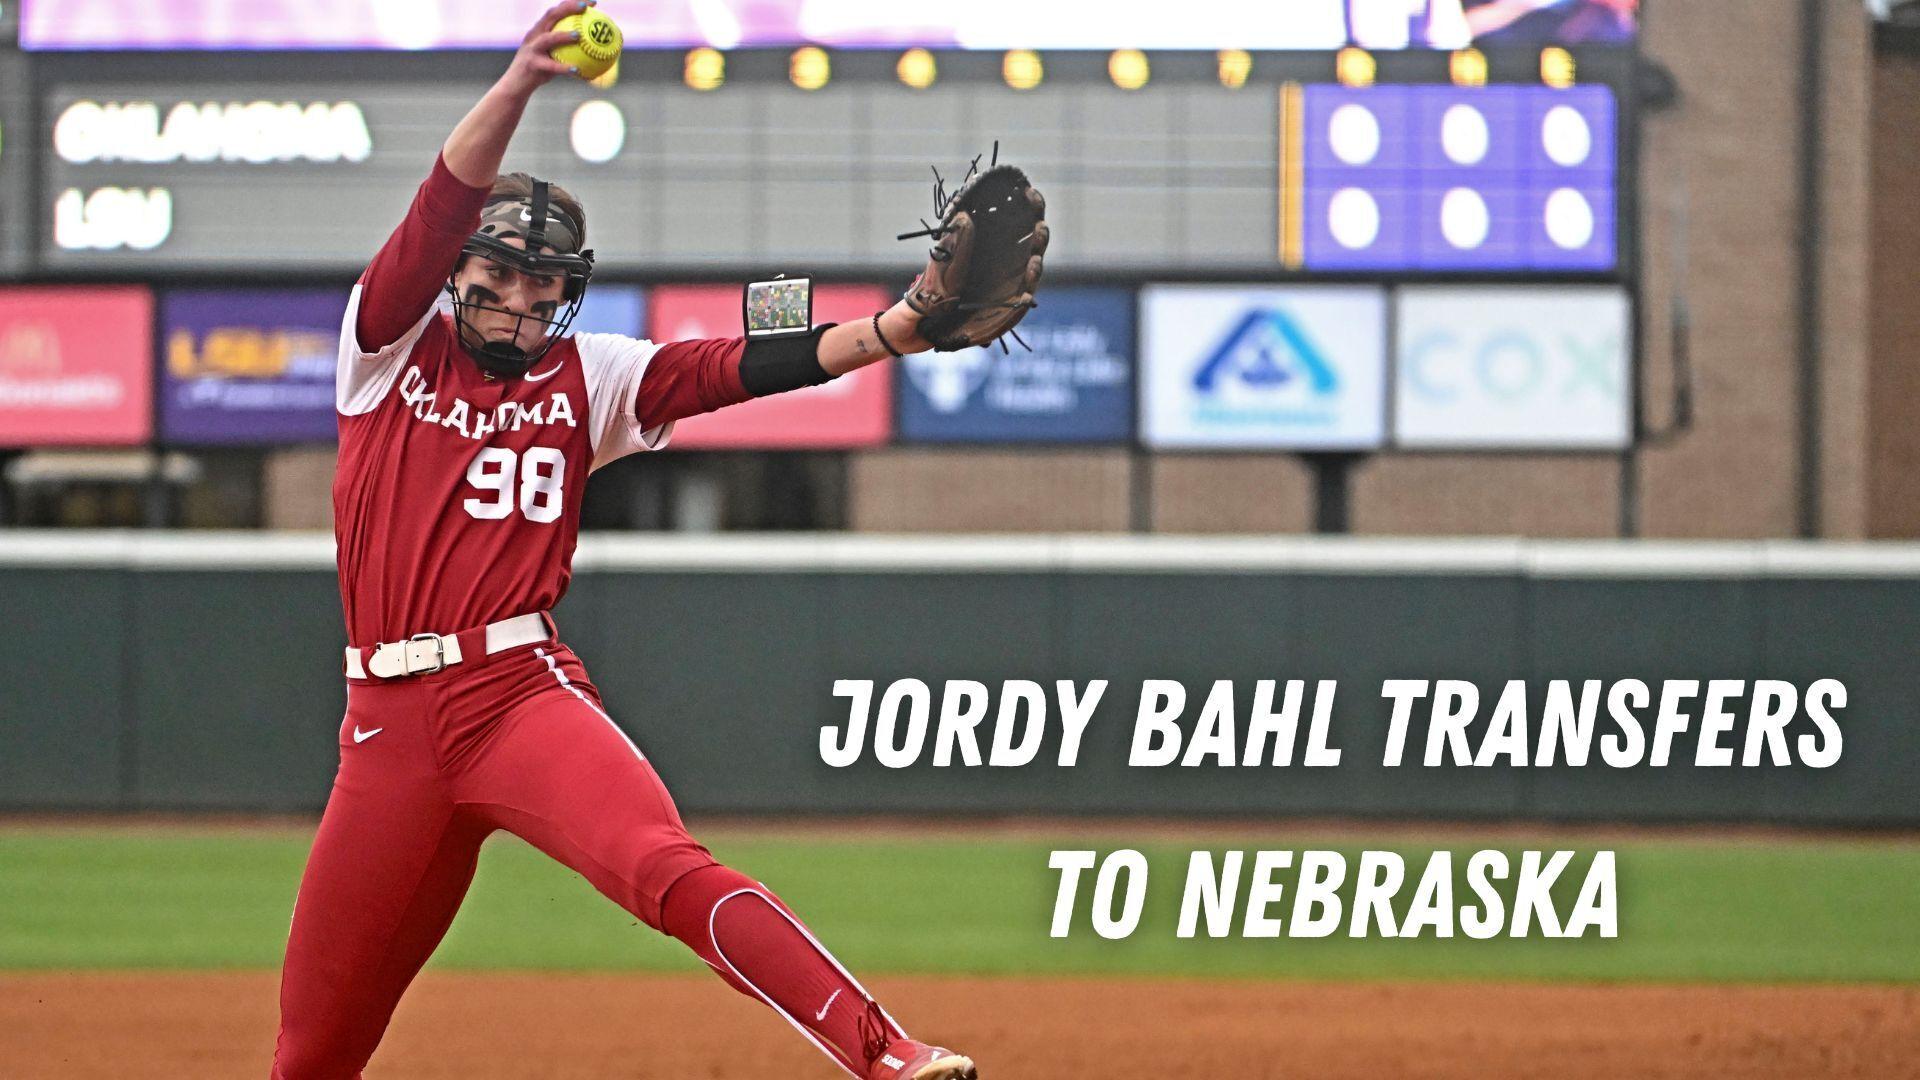 It was Jordy Bahl night over the weekend at the Omaha Storm Chasers ga